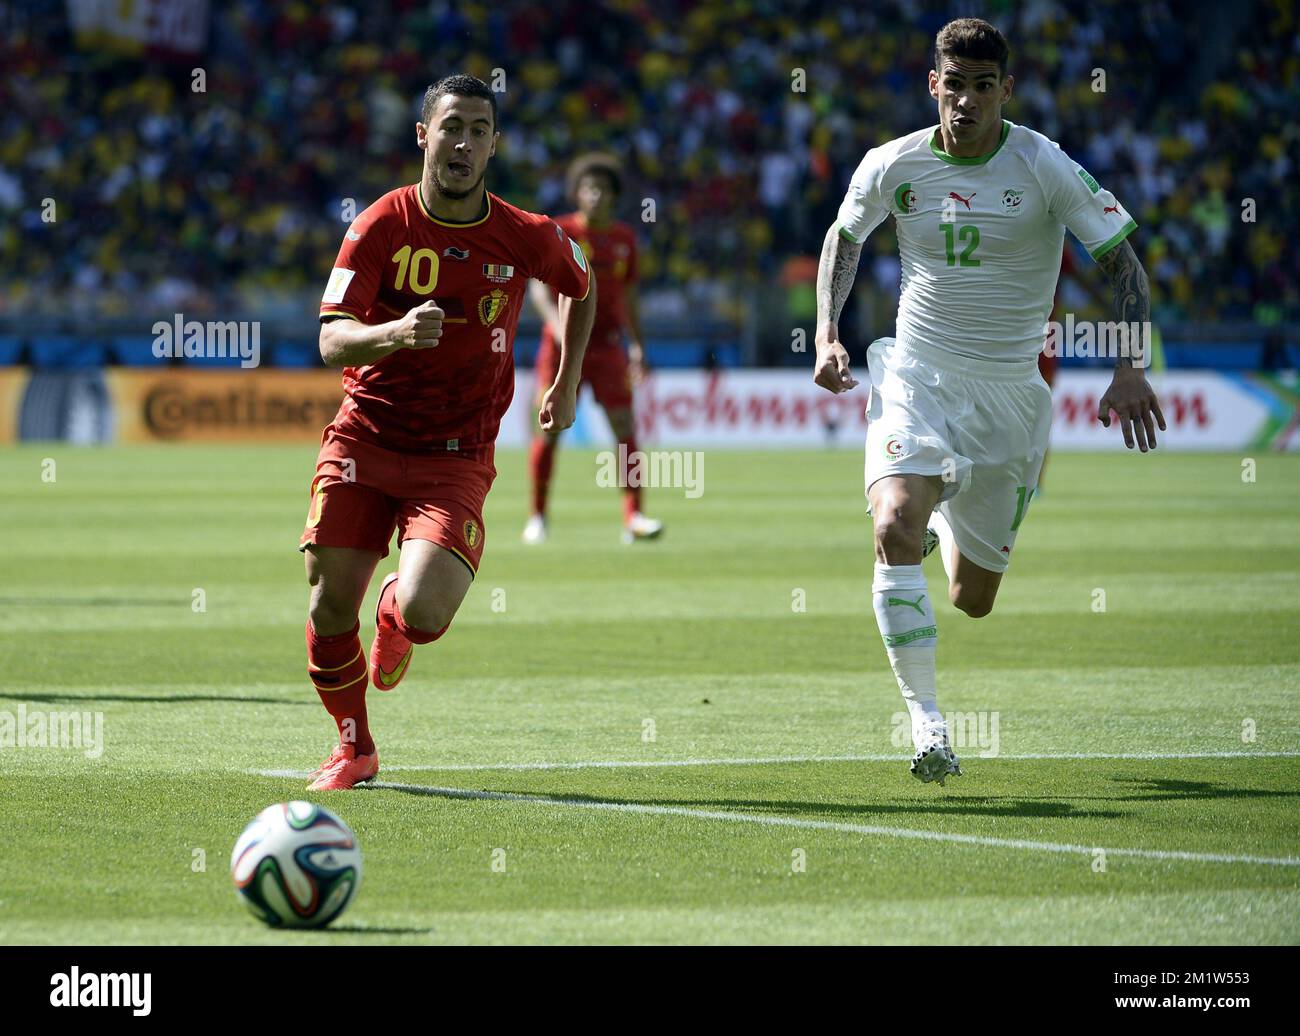 Belgium's Eden Hazard and Algeria's Carl Medjani pictured in action during a soccer game between Belgian national team The Red Devils and Algeria in Belo Horizonte, Brazil, the first game in Group H of the first round of the 2014 FIFA World Cup, Tuesday 17 June 2014.  Stock Photo